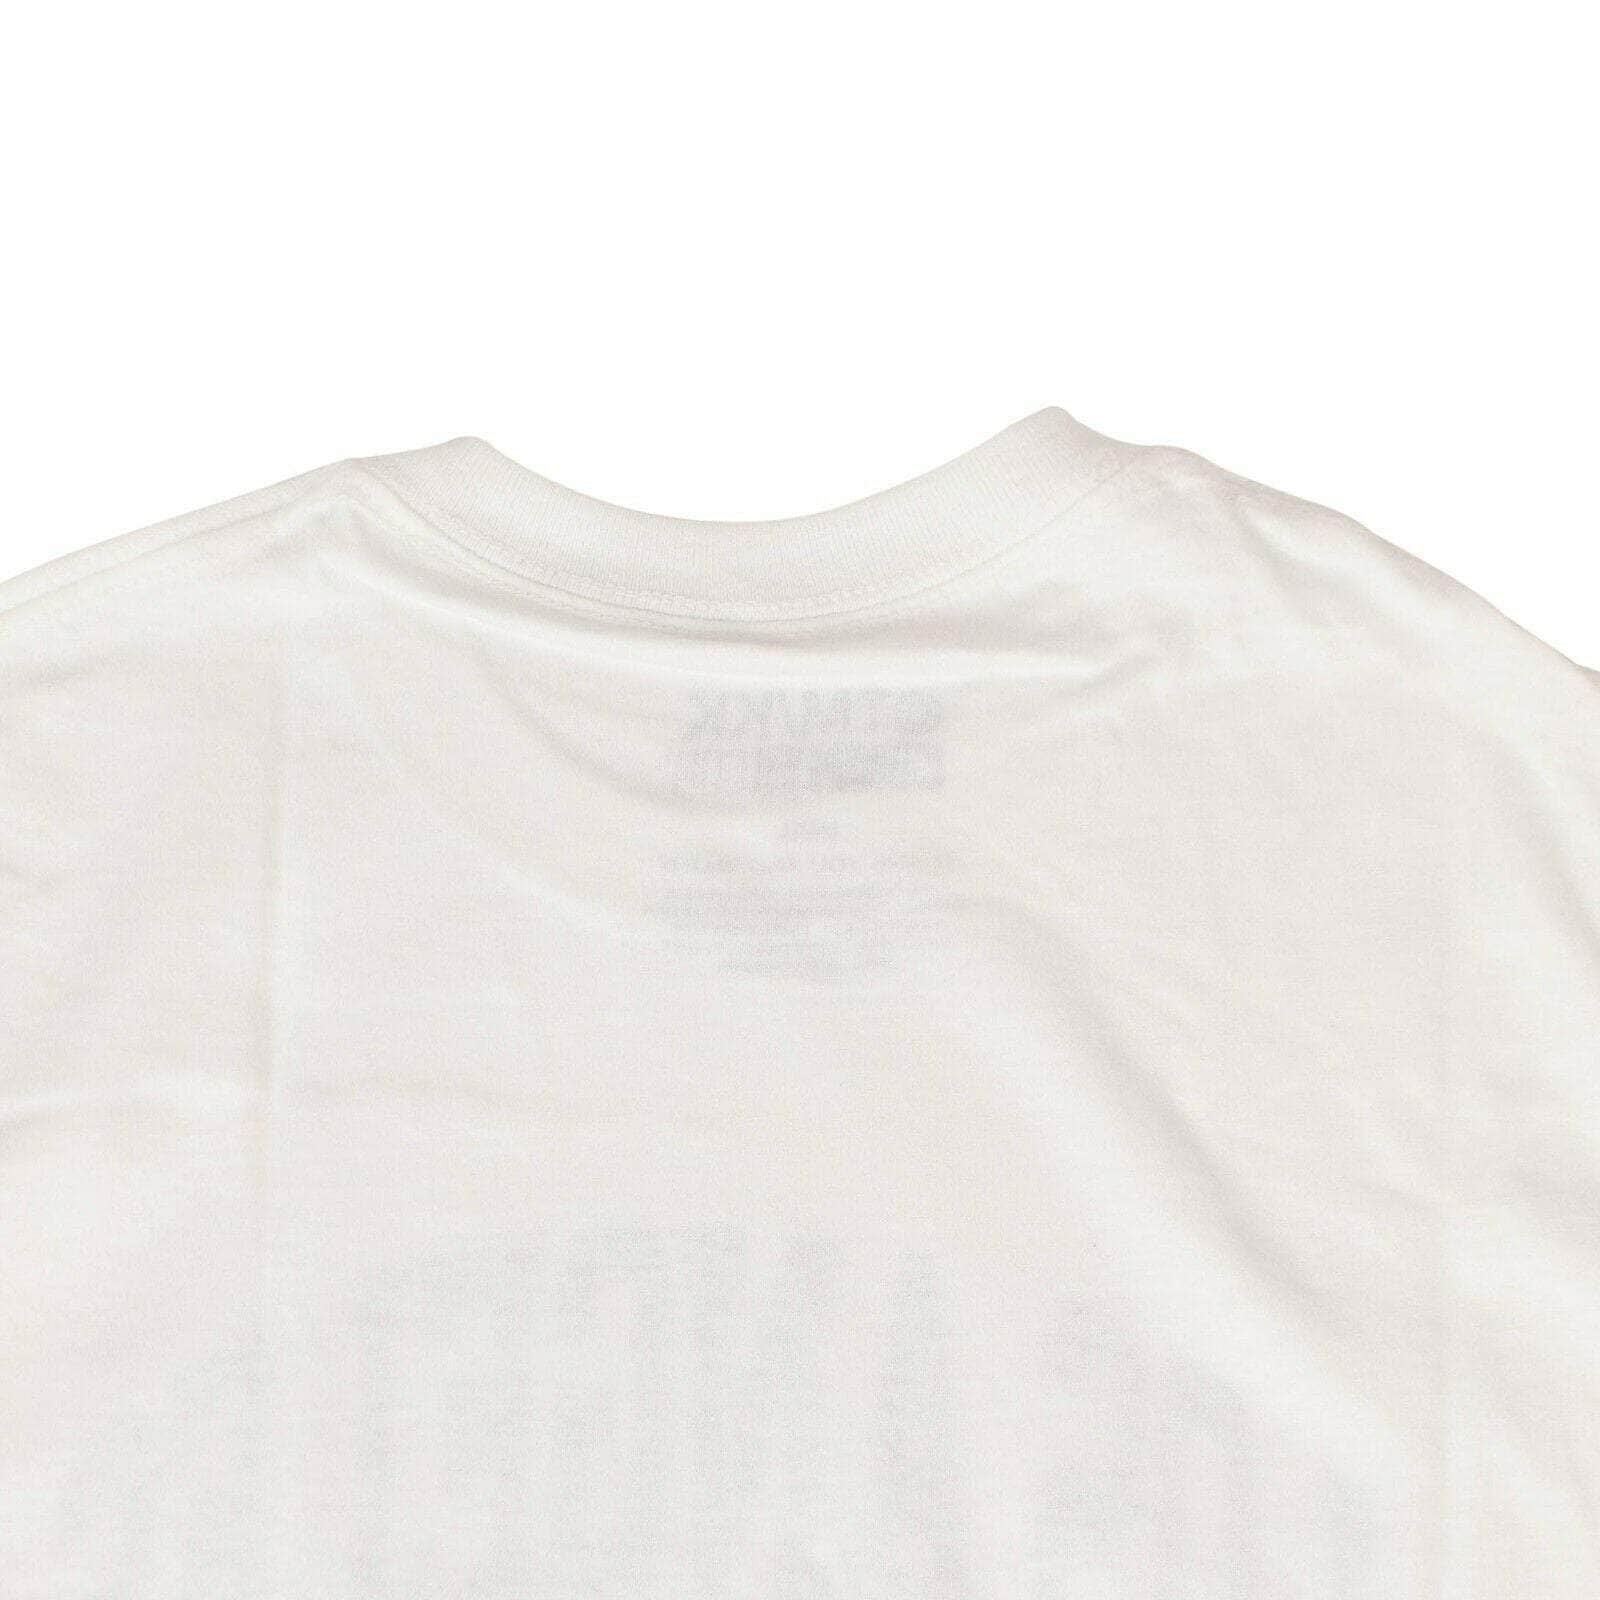 Takashi Murakami chicmi, couponcollection, gender-mens, main-clothing, mens-shoes, size-s, t-shirt, takashi-murakami, under-250 S / CCLASS-002 TAKASHI MURAKAMI x COMPLEXCON 'Los Angeles Flower' T-Shirt - White 78TM-13/S 78TM-13/S